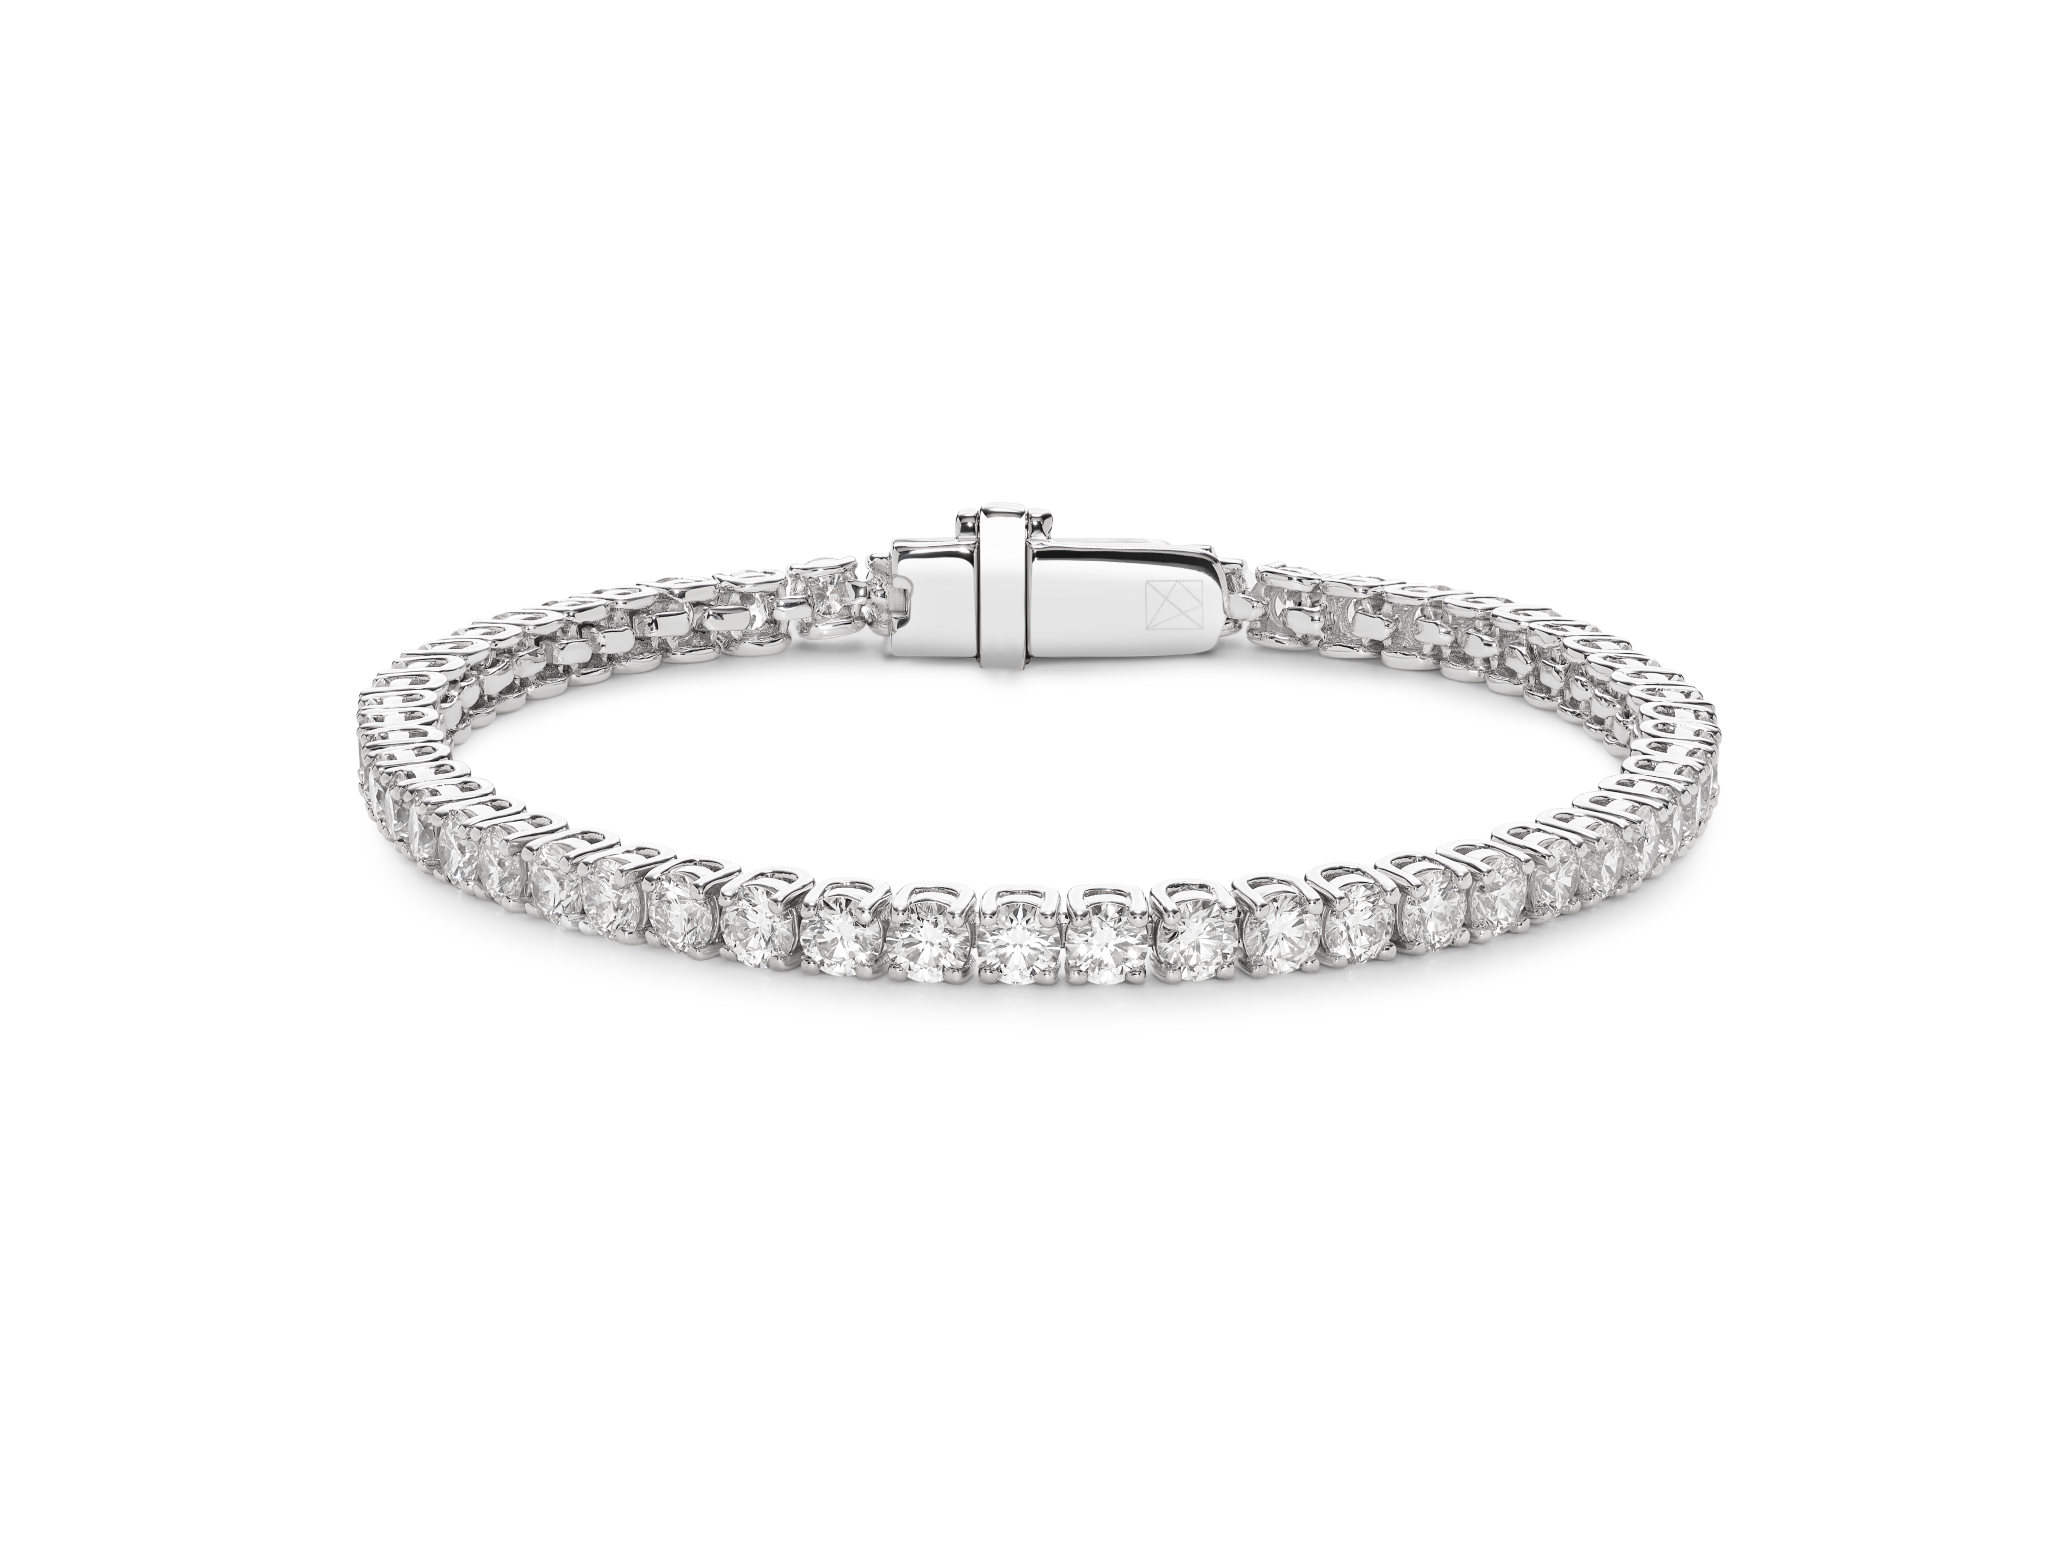 Front view of small tennis bracelet